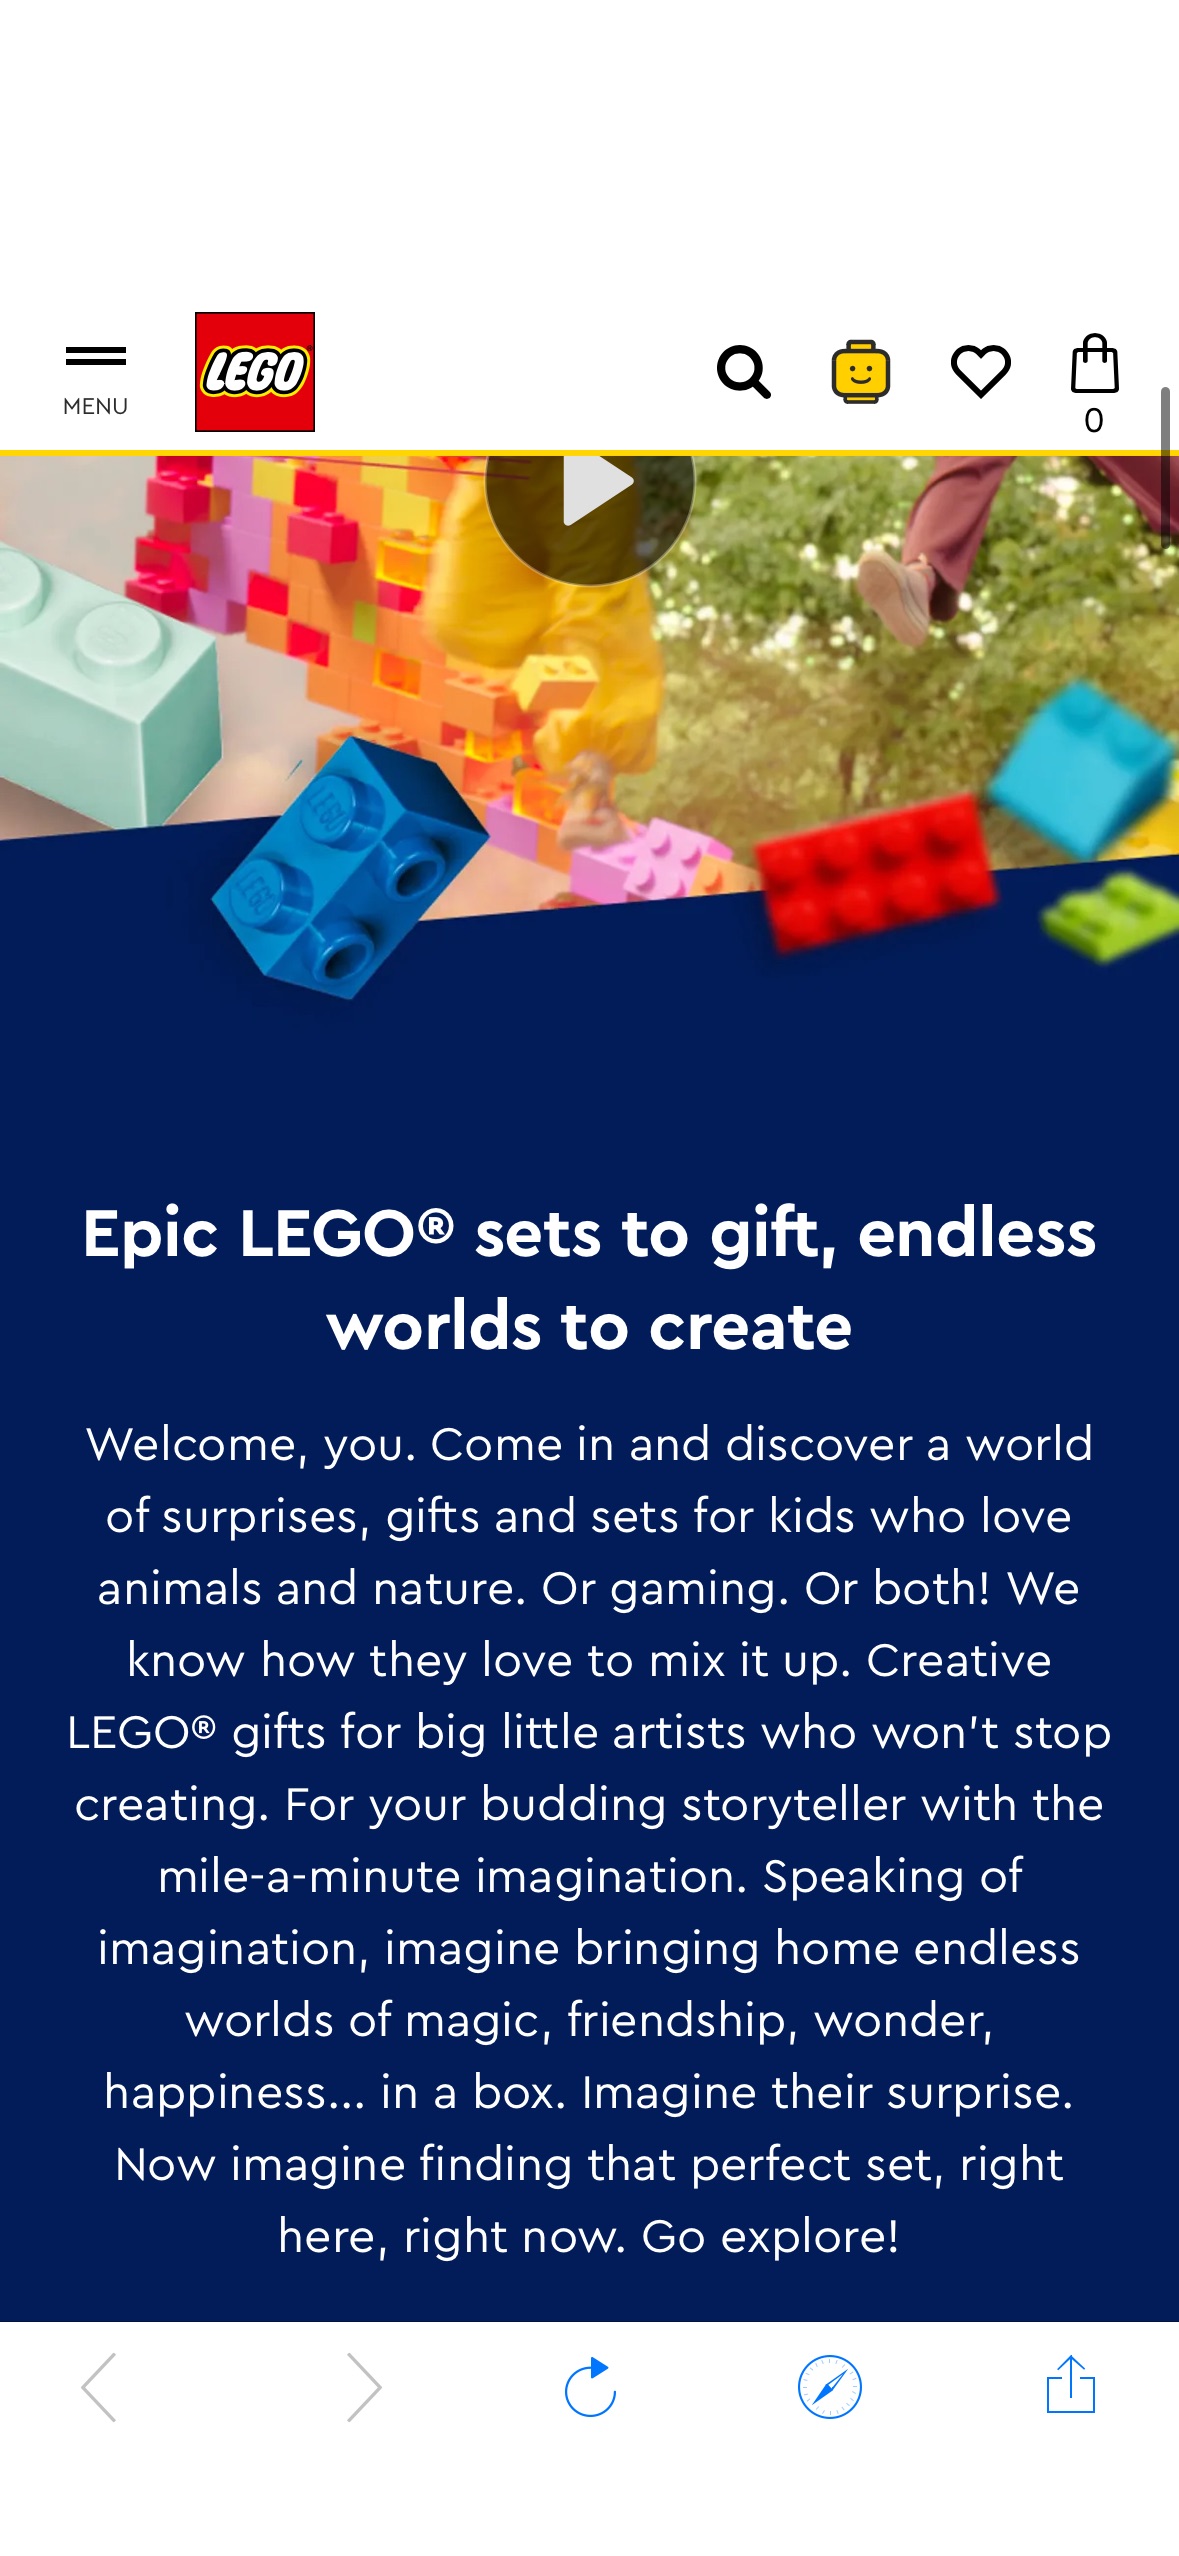 FREE Creativity Workshops at the LEGO Stores! The first upcoming event is on April 20th-21st, and the theme is “Celebrate Your Star Power”, where you can build and customize a fun photo frame!
Upcomin